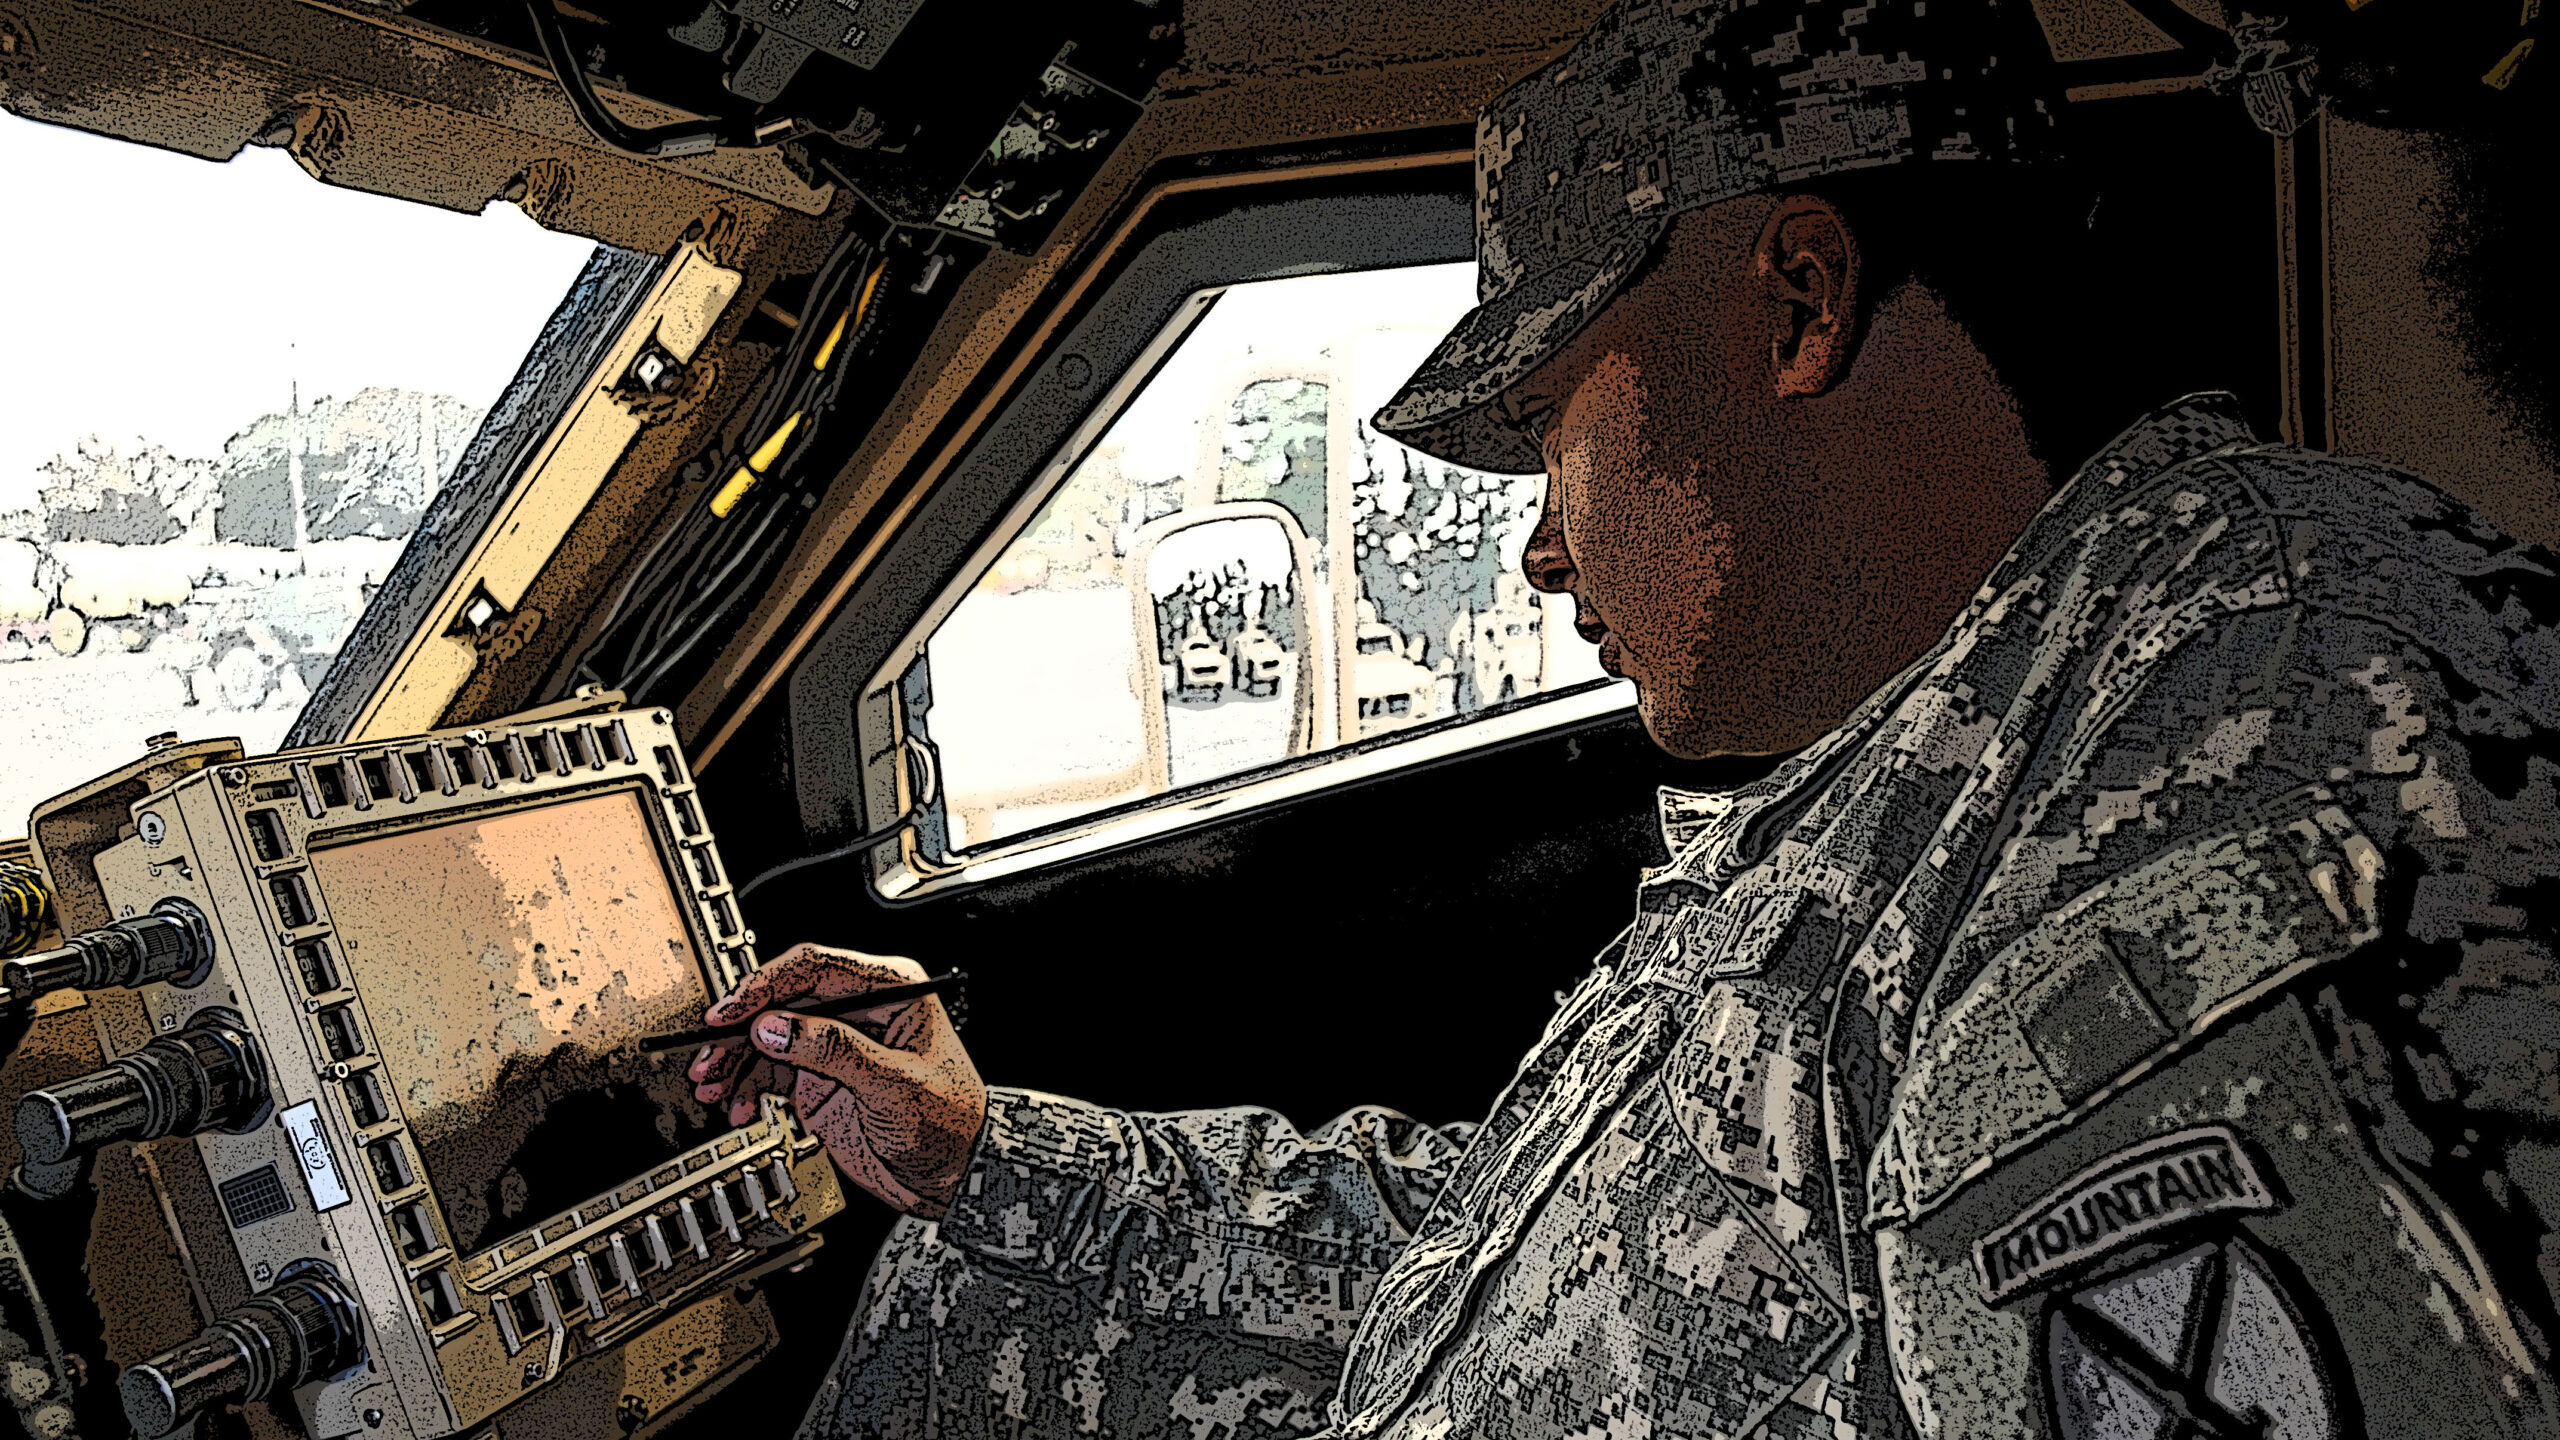 The Army wants someone to make comics about its information warfare doctrine